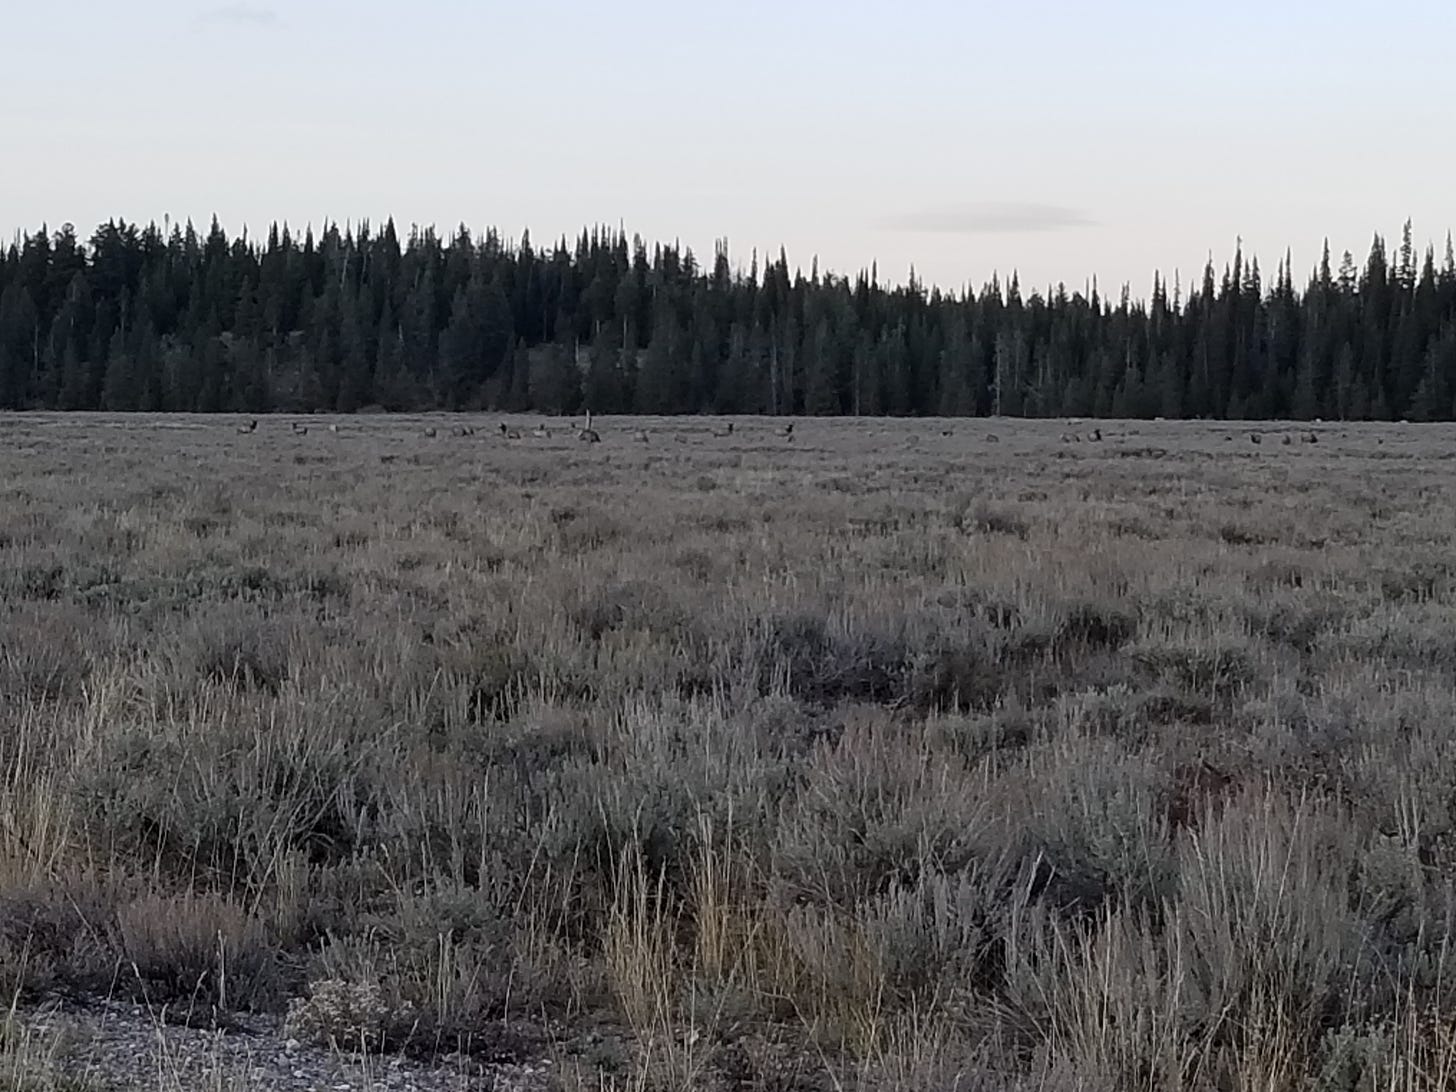 field at dusk, elk lying down, forest in background